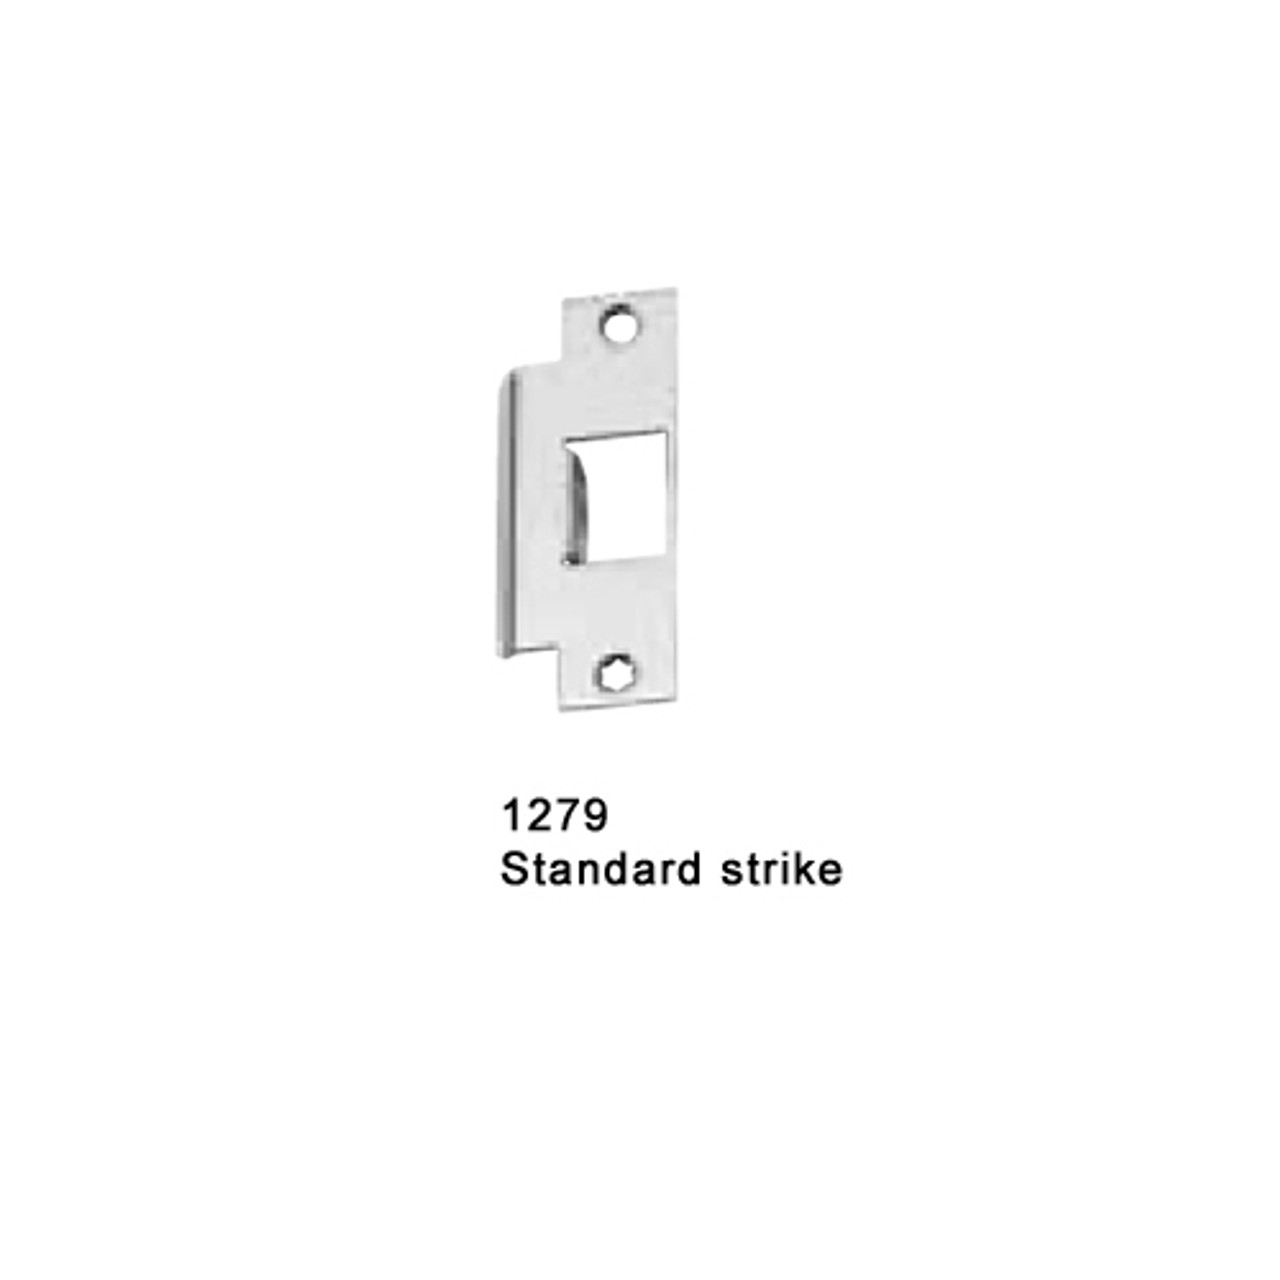 F-25-M-L-DT-Dane-US10-3-LHR Falcon 25 Series Fire Rated Mortise Lock Devices 510L-DT Dane Lever Trim with Dummy Trim in Satin Bronze